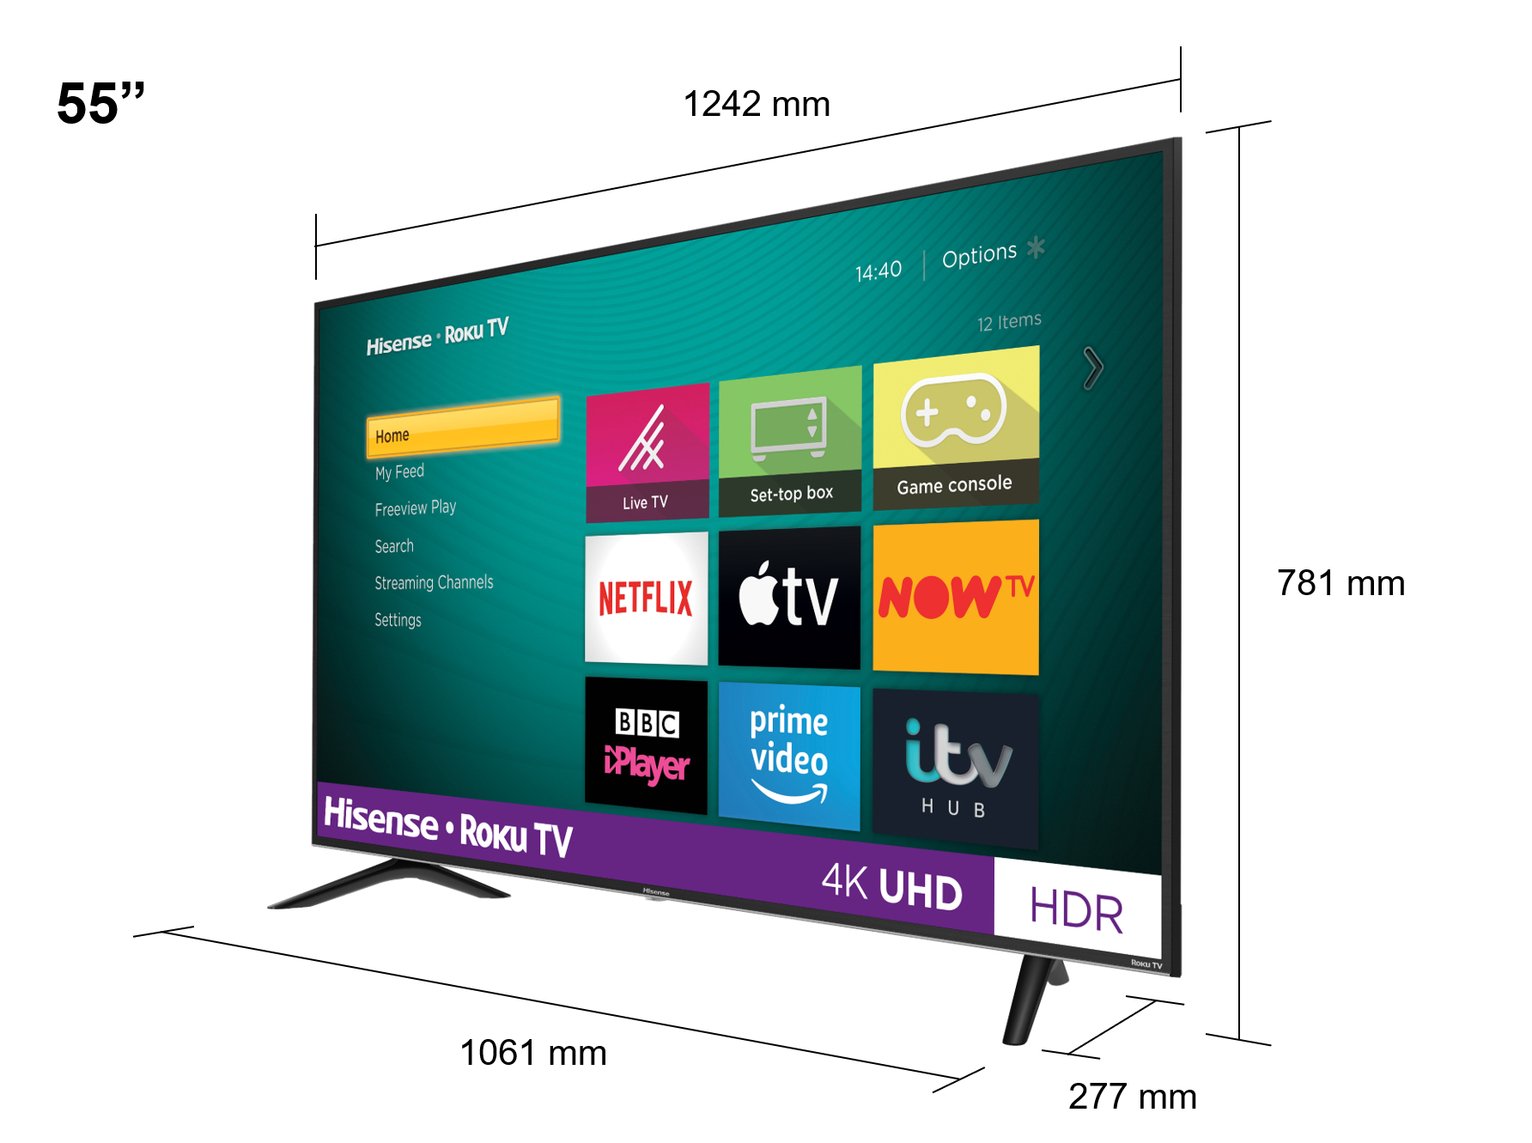 Hisense Roku TV 55 Inch R55B7120UK 4K Smart LED TV with HDR Review